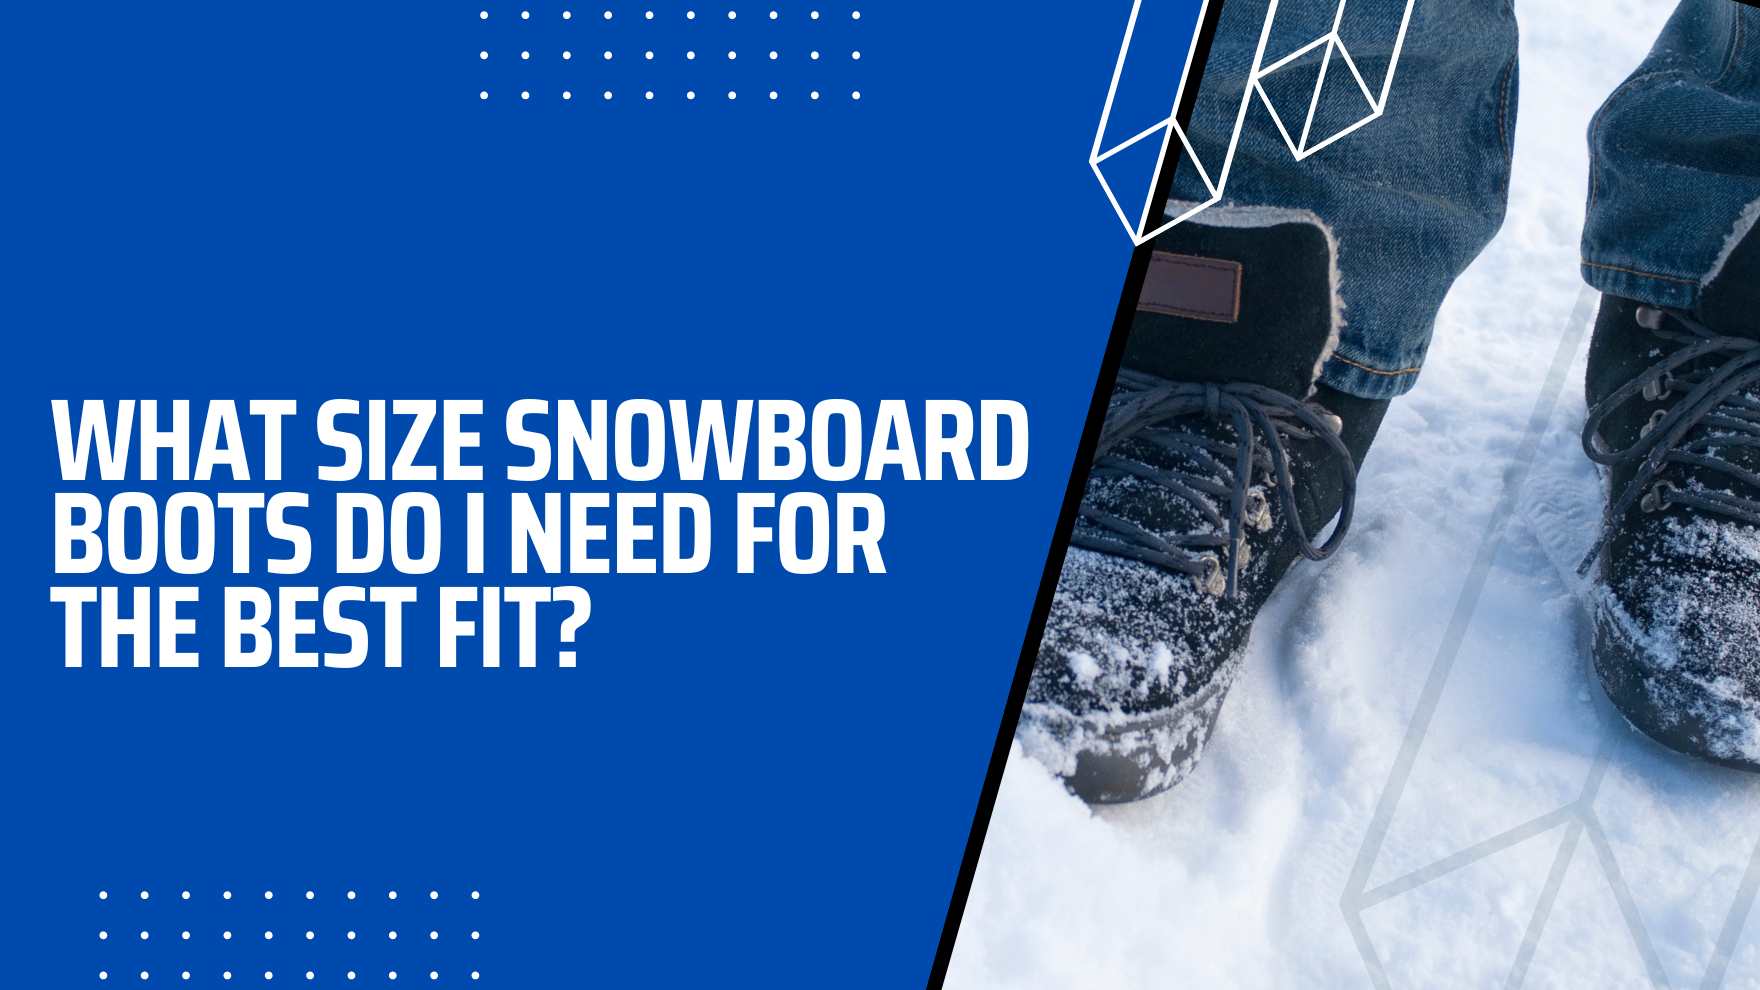 What size snowboard boots